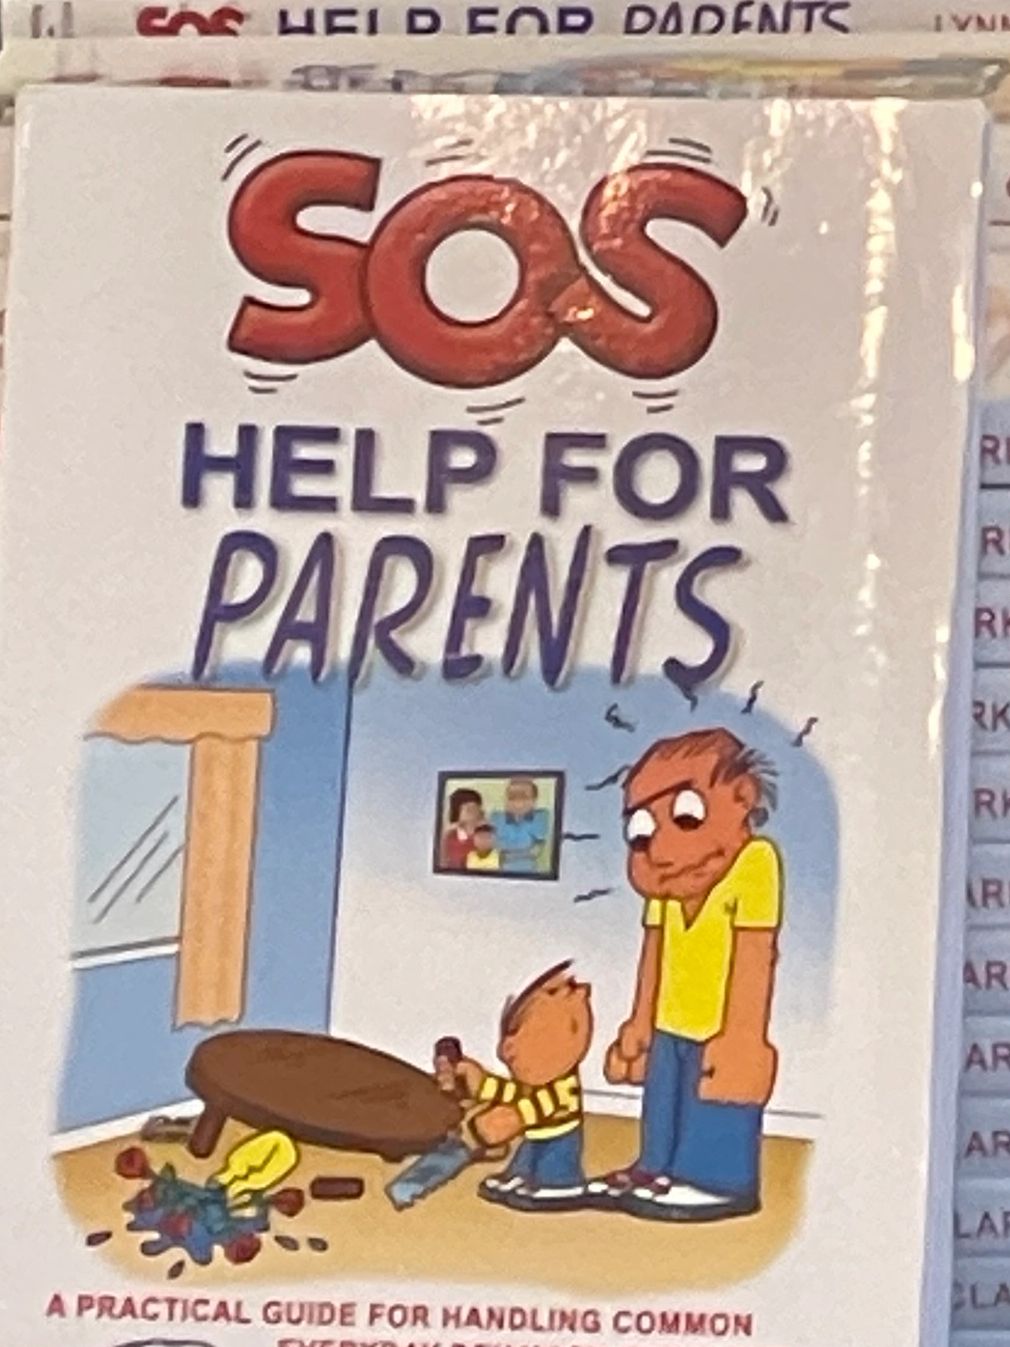 SOS Help For Parents, book.